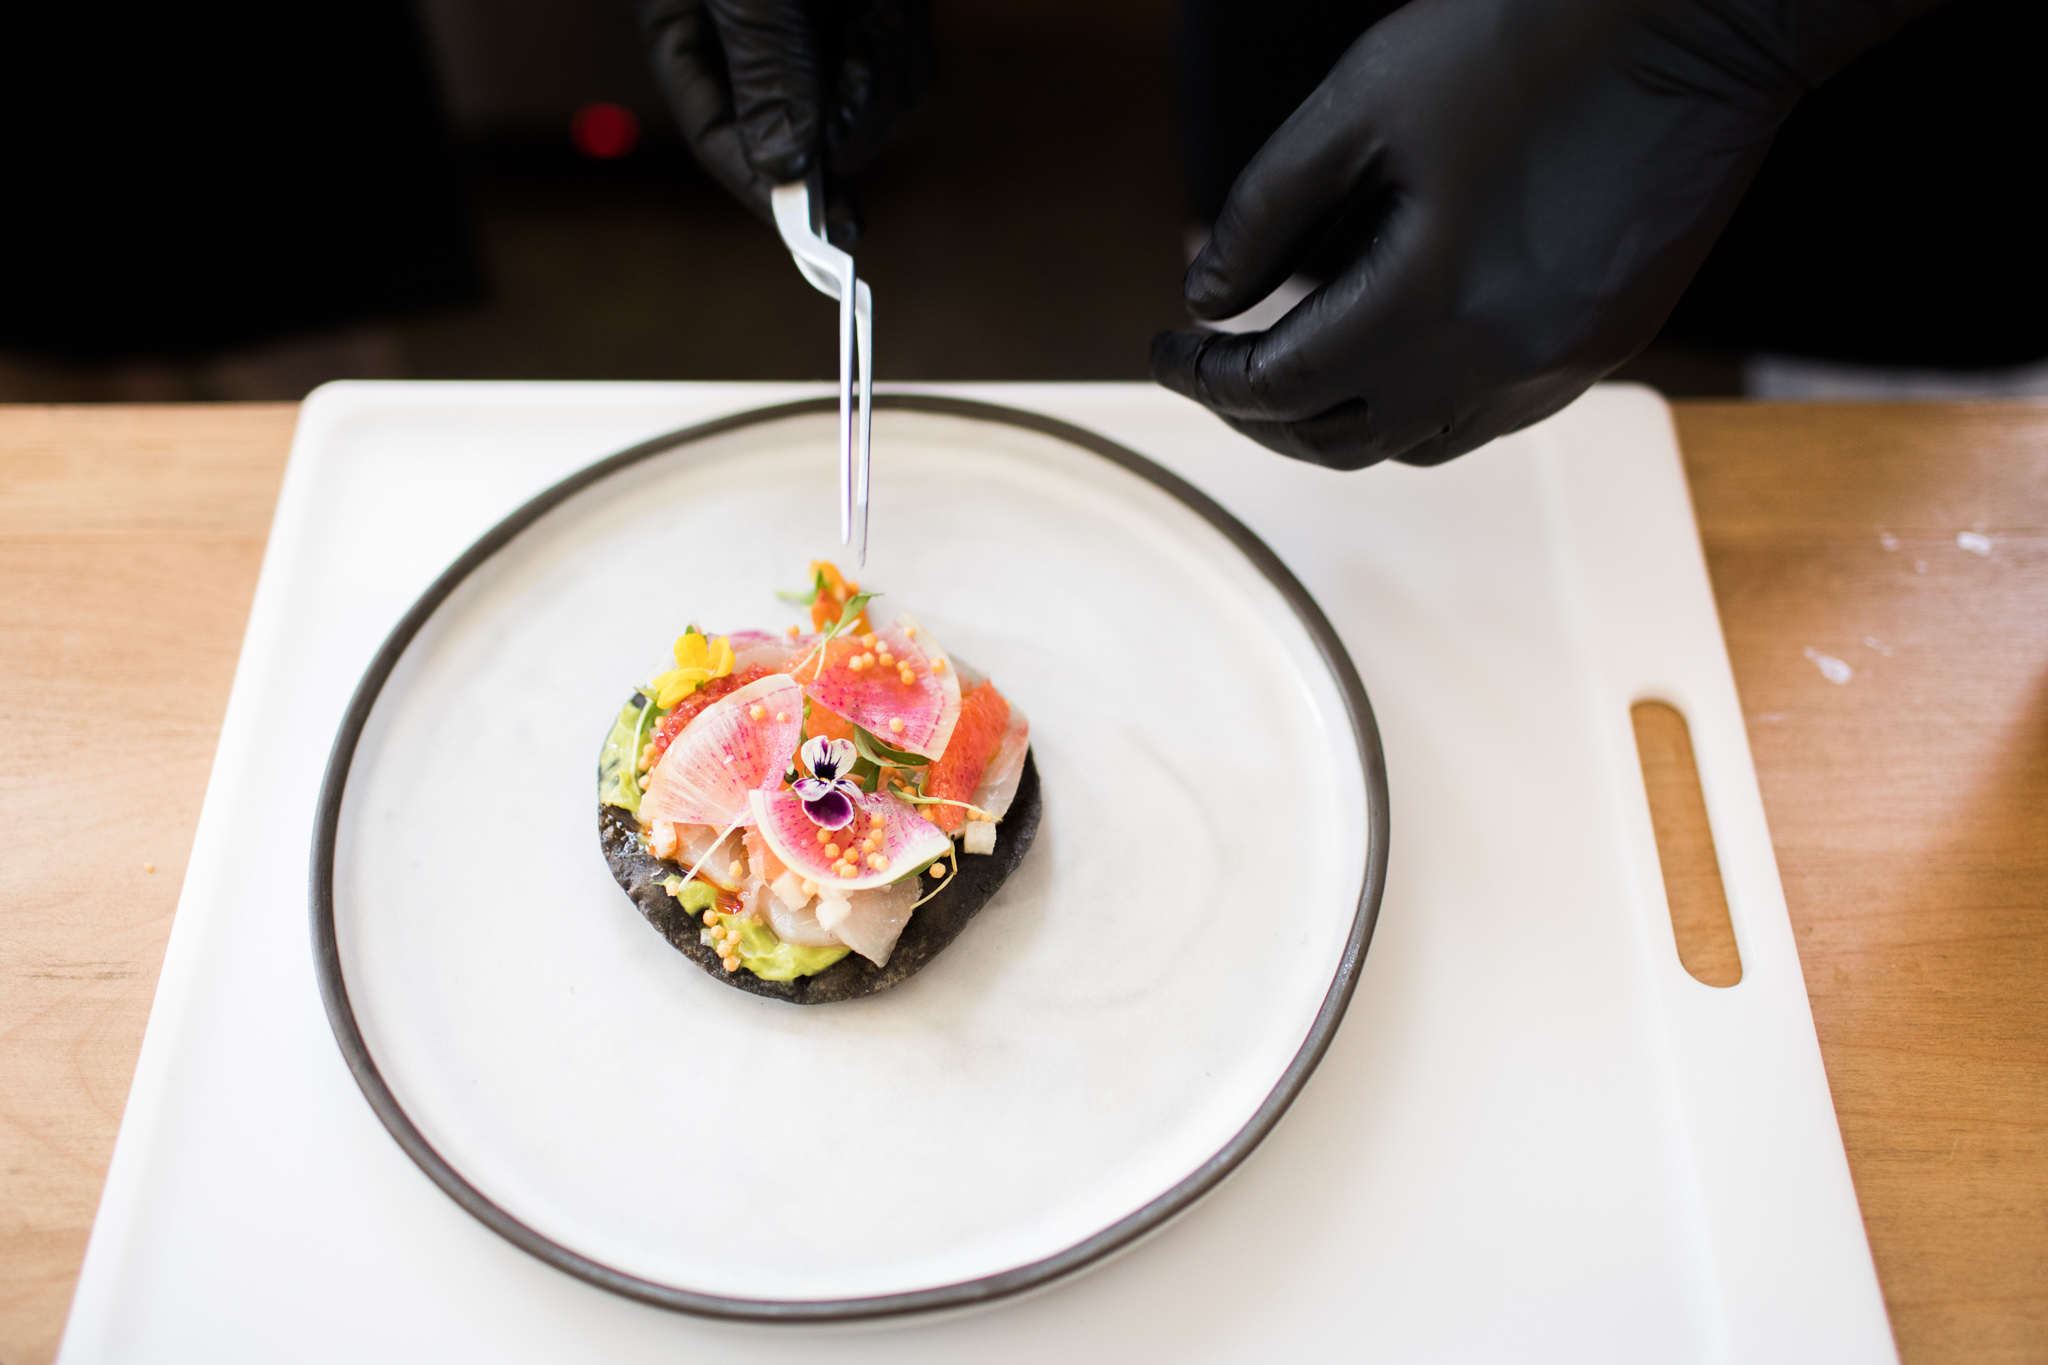 A chef garnishes his dish with edible flowers